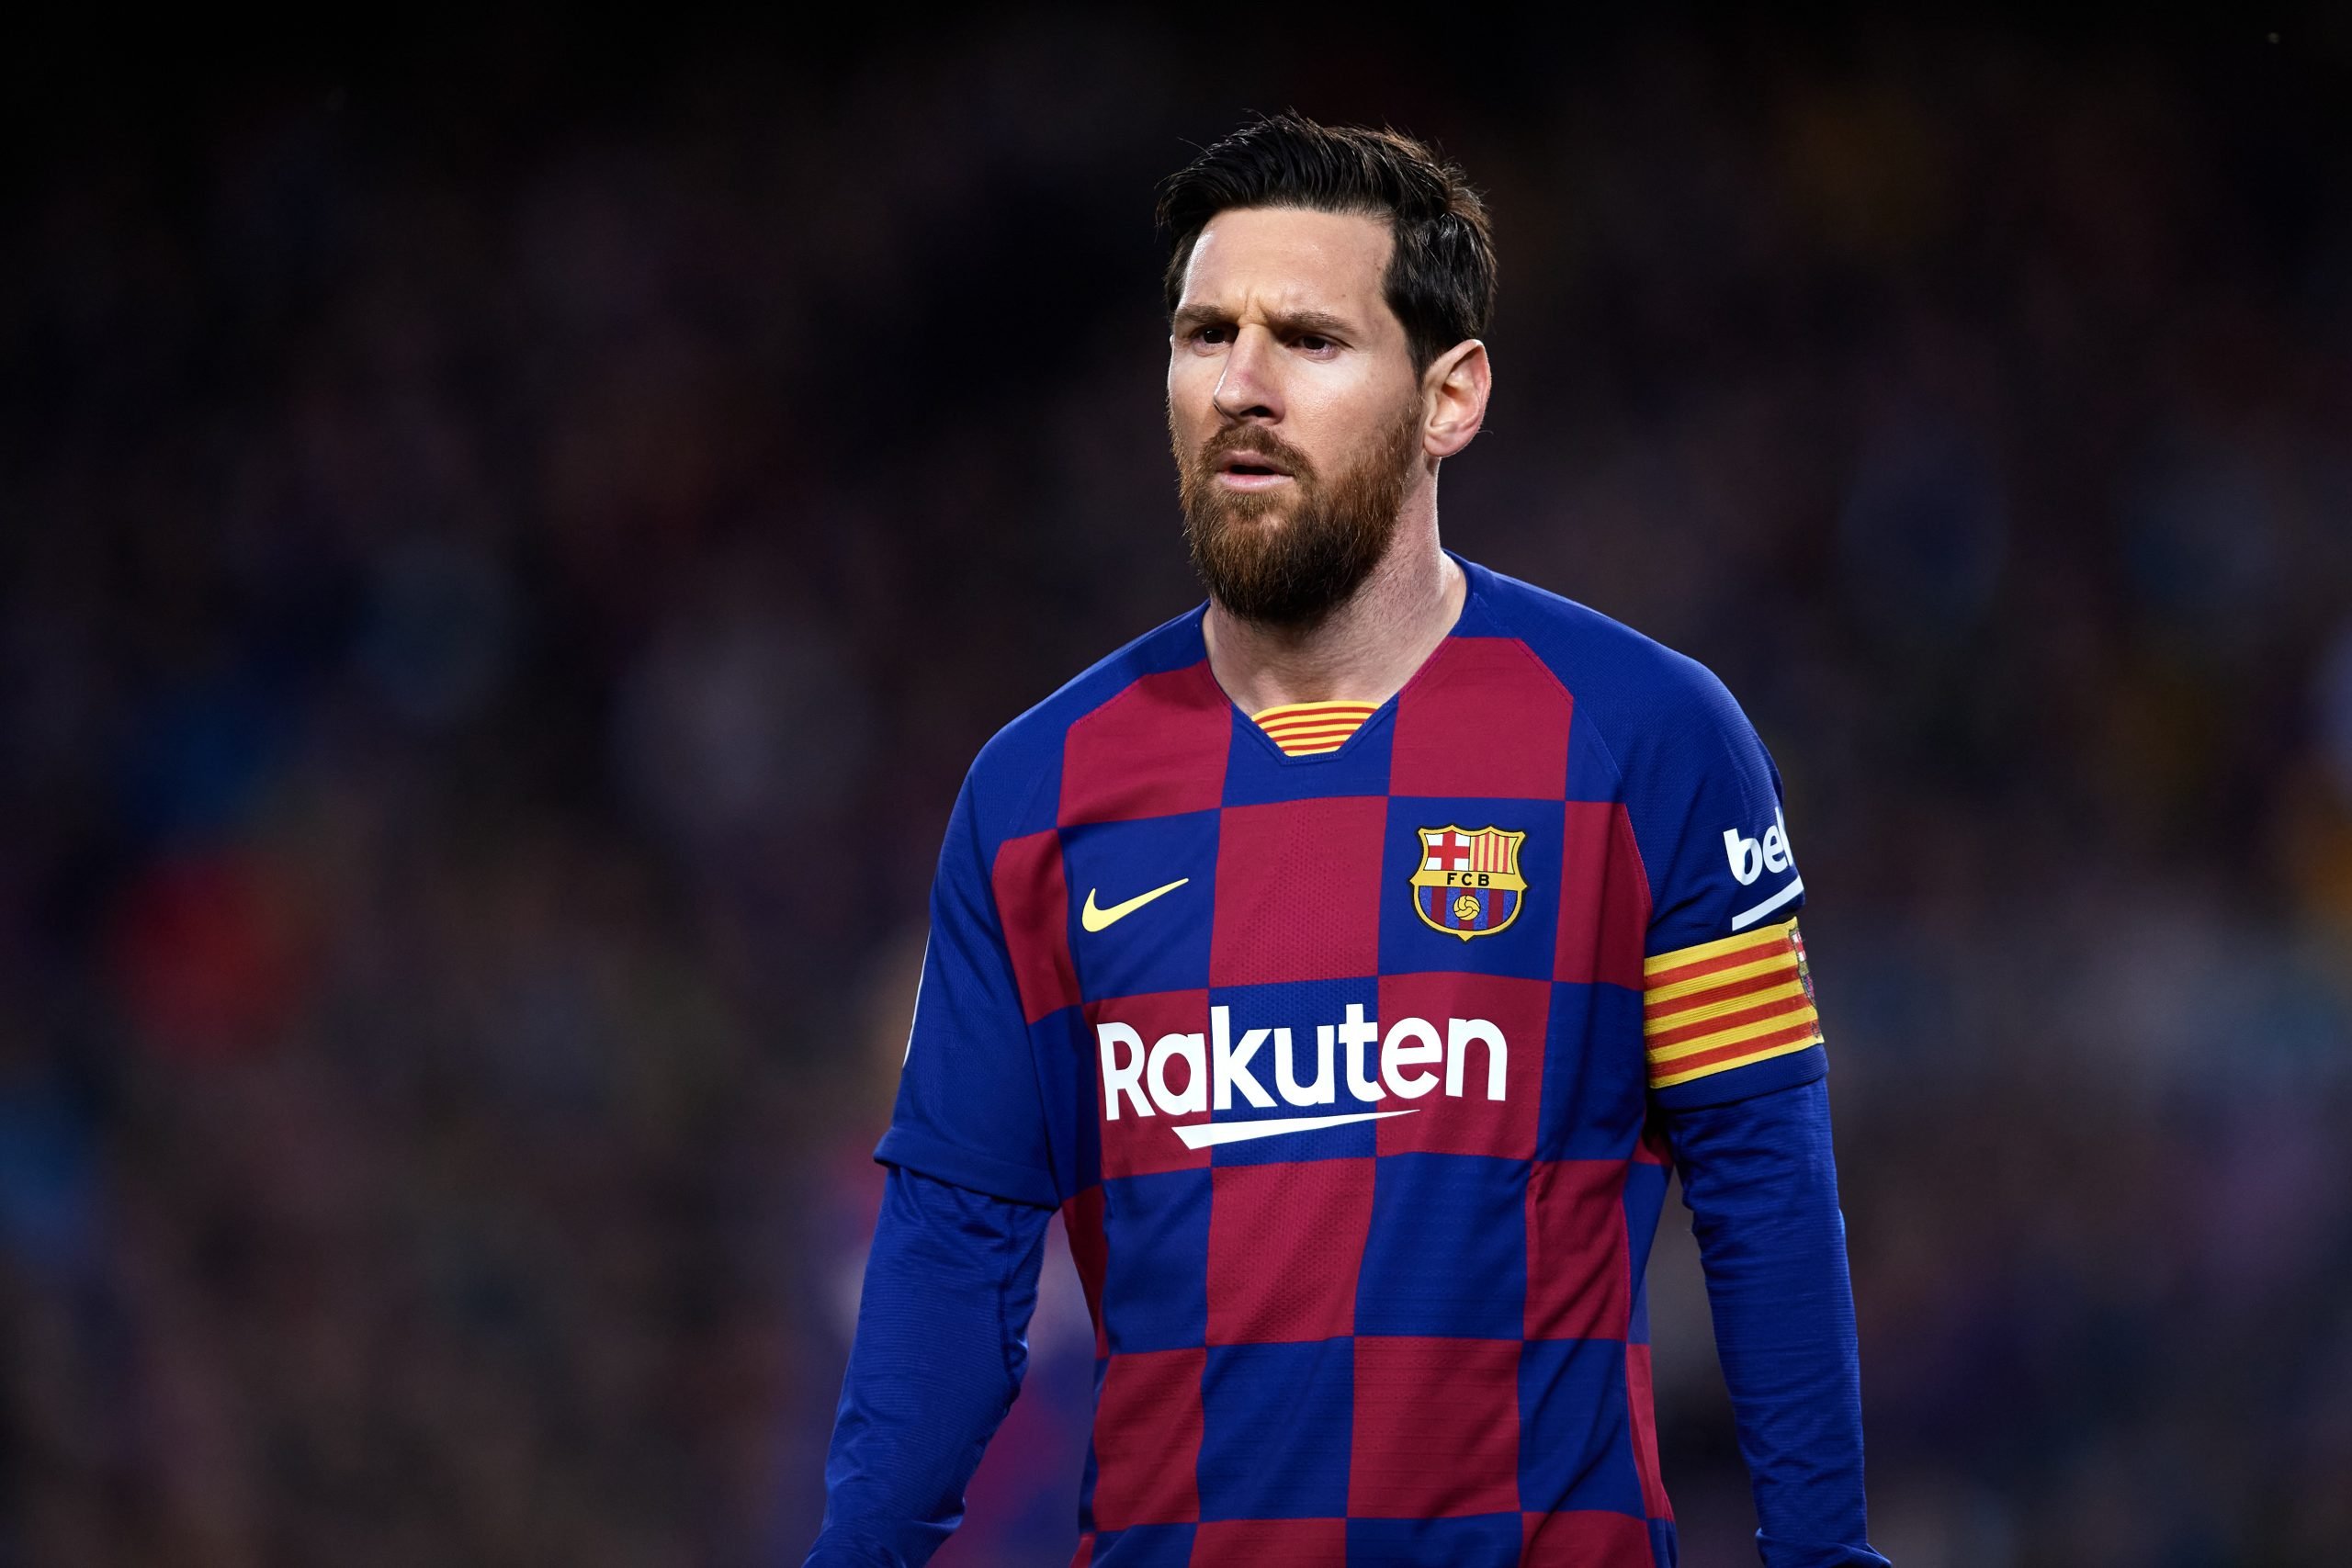 BARCELONA, SPAIN - MARCH 07: Lionel Messi of FC Barcelona looks on during the Liga match between FC Barcelona and Real Sociedad at Camp Nou on March 07, 2020 in Barcelona, Spain. (Photo by Alex Caparros/Getty Images)